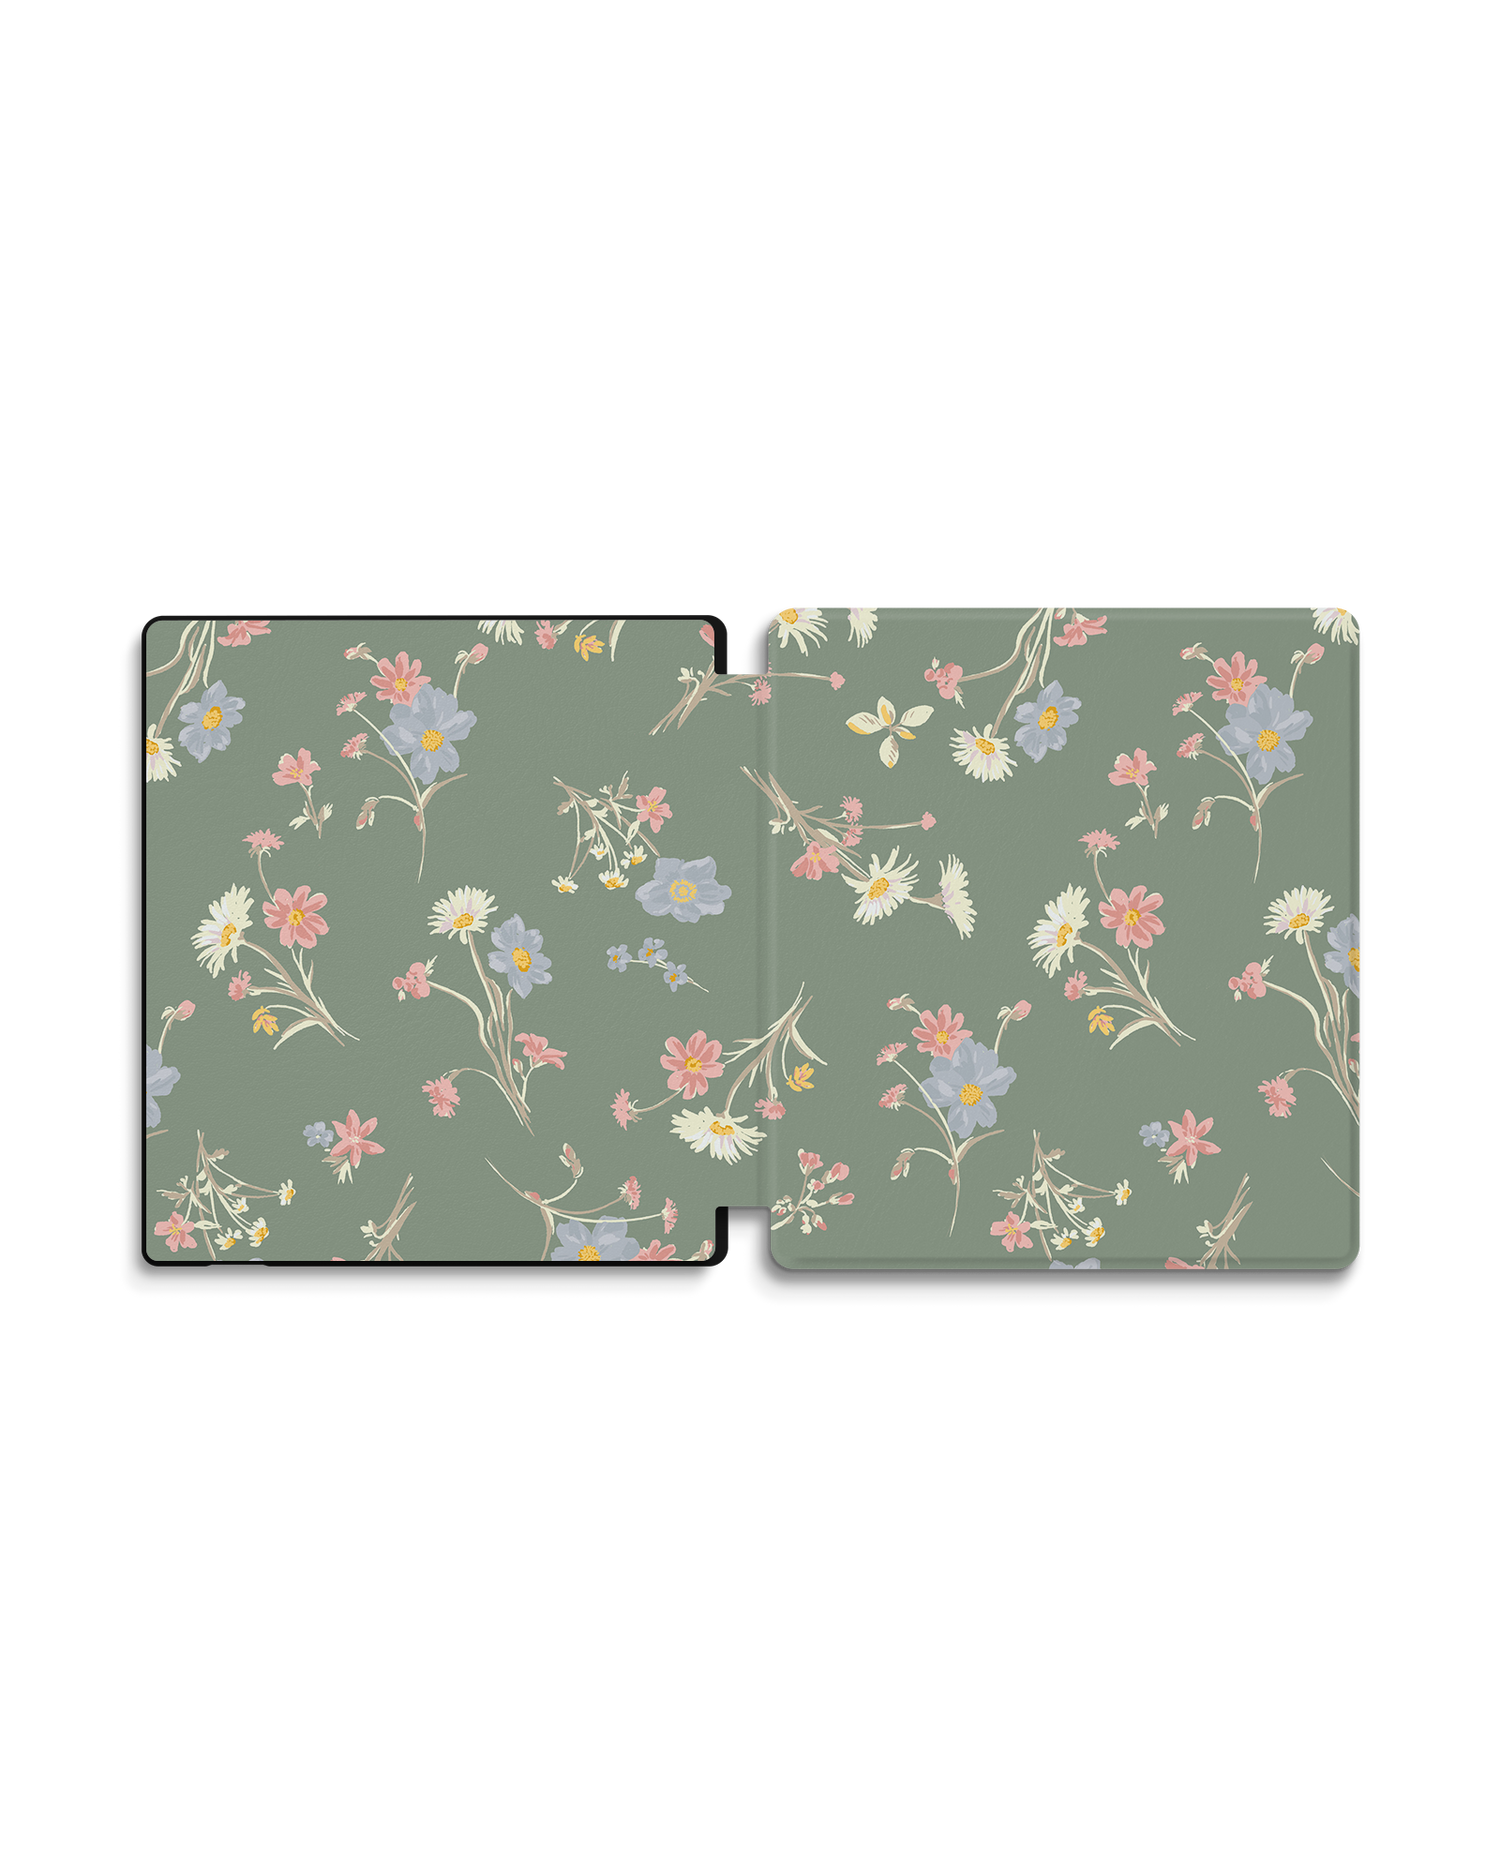 Wild Flower Sprigs eReader Smart Case for Amazon Kindle Oasis: Opened exterior view